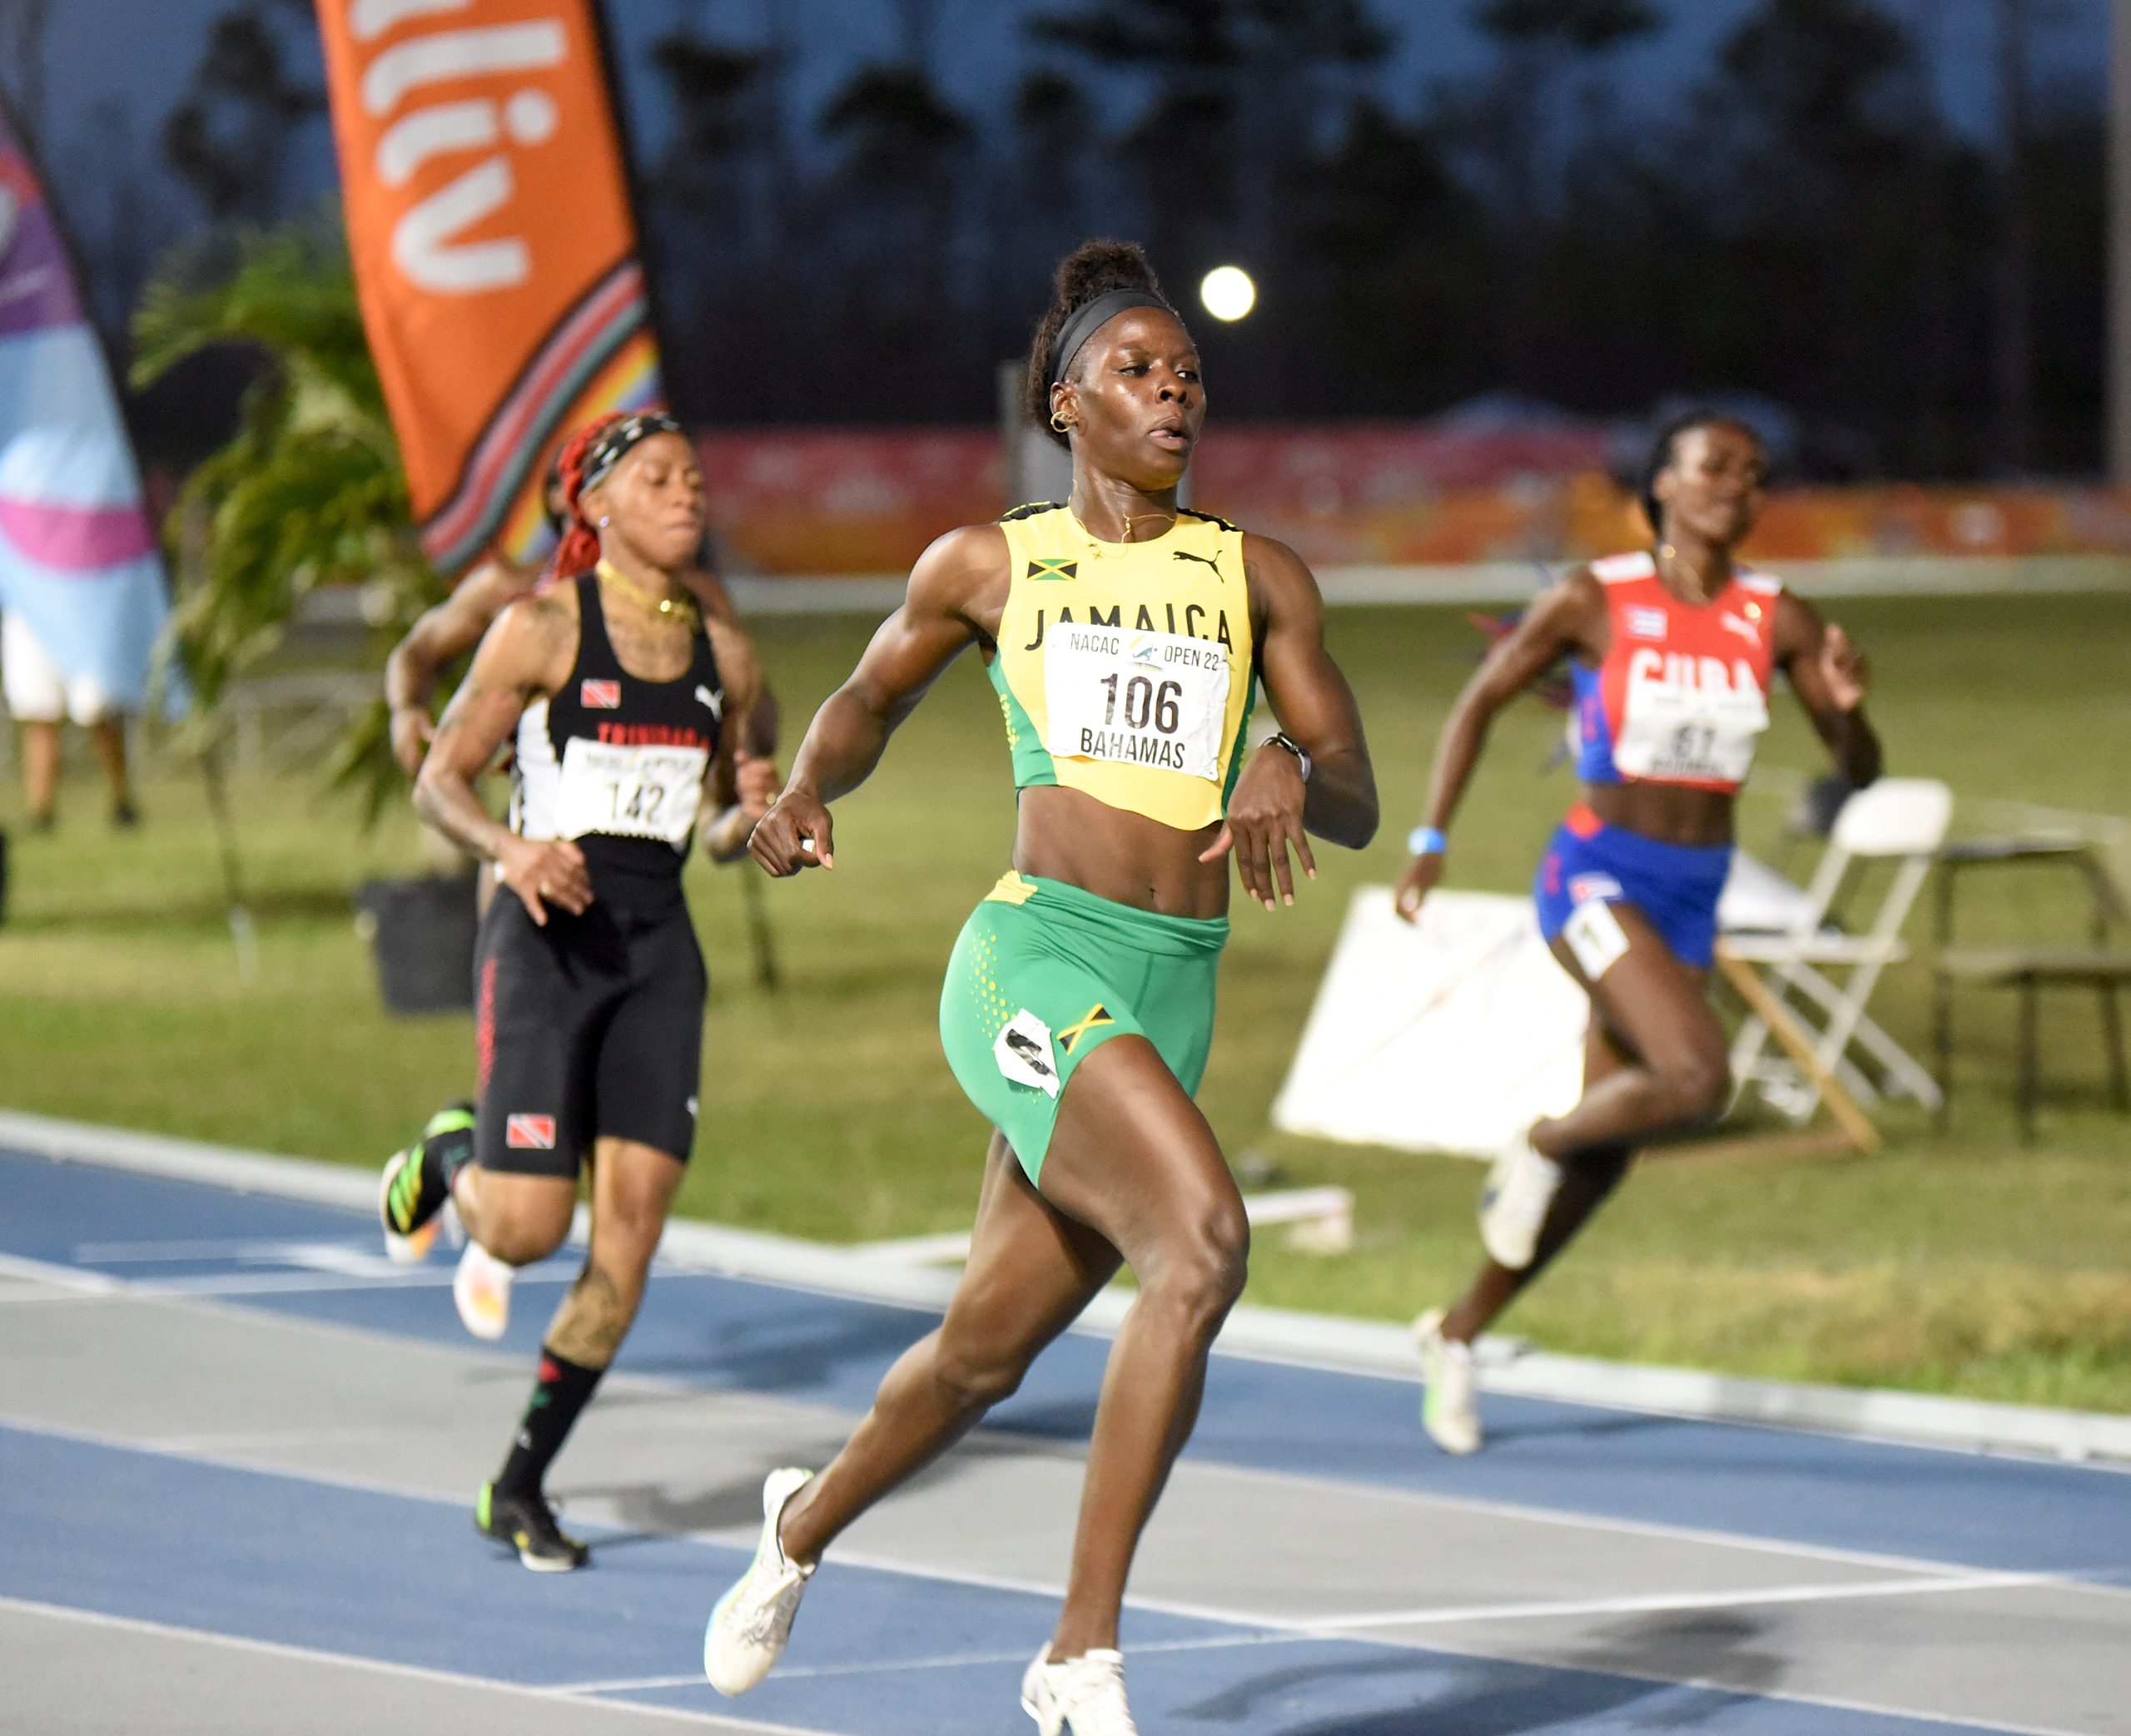 Shericka Jackson wins the women's 100m in a championship record 10.83 at the NACAC Open Championships in Freeport, Grand Bahamas